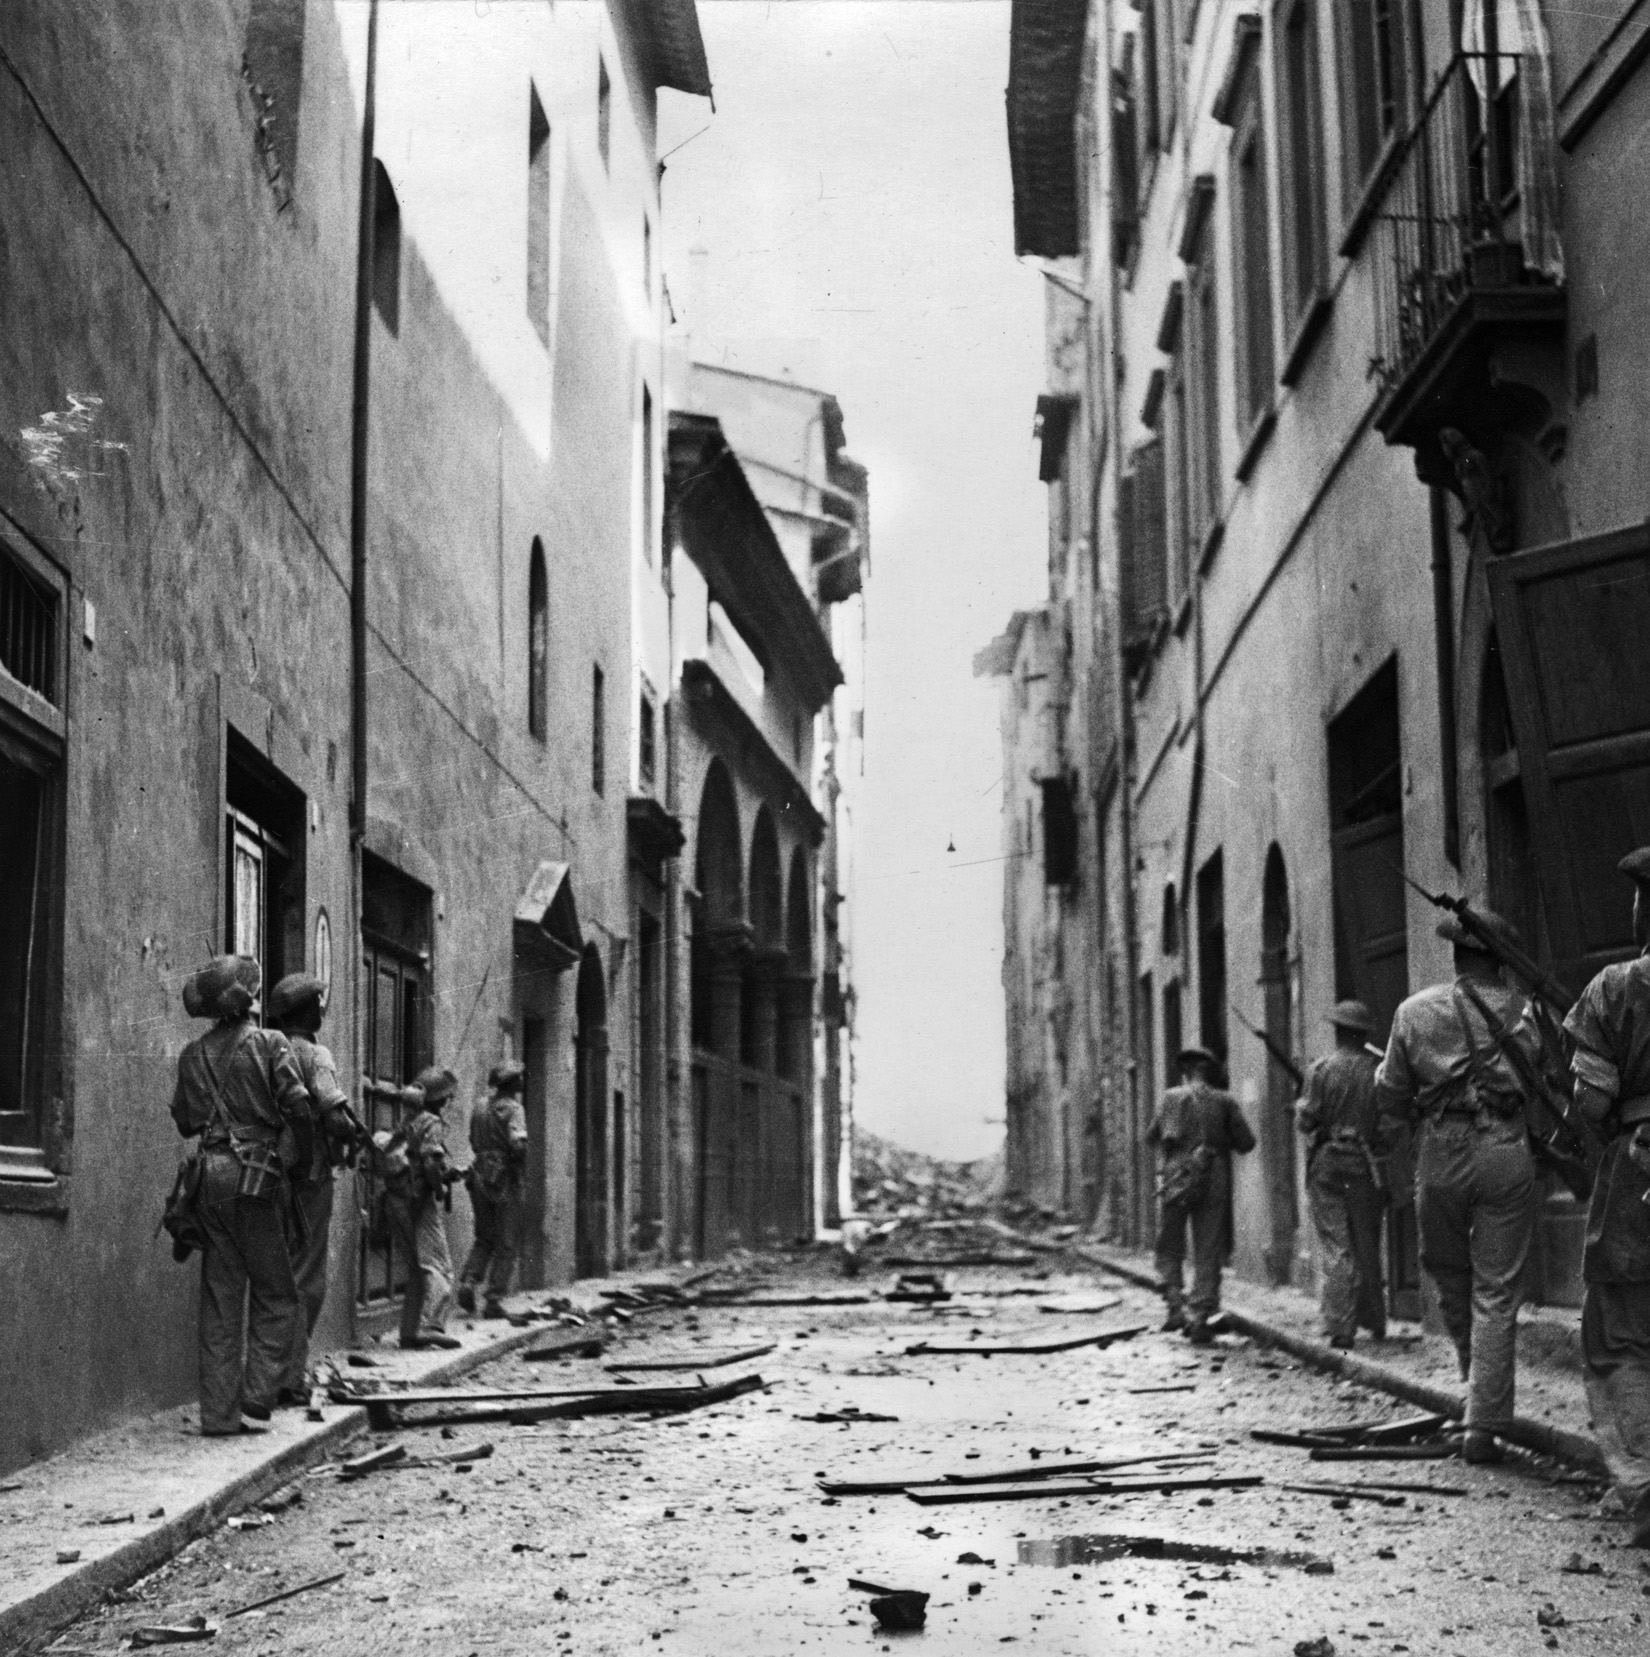 South African soldiers from the 6th Armoured Division, now a part of the U.S. II Corps, patrol the streets of Florence, August 1944.